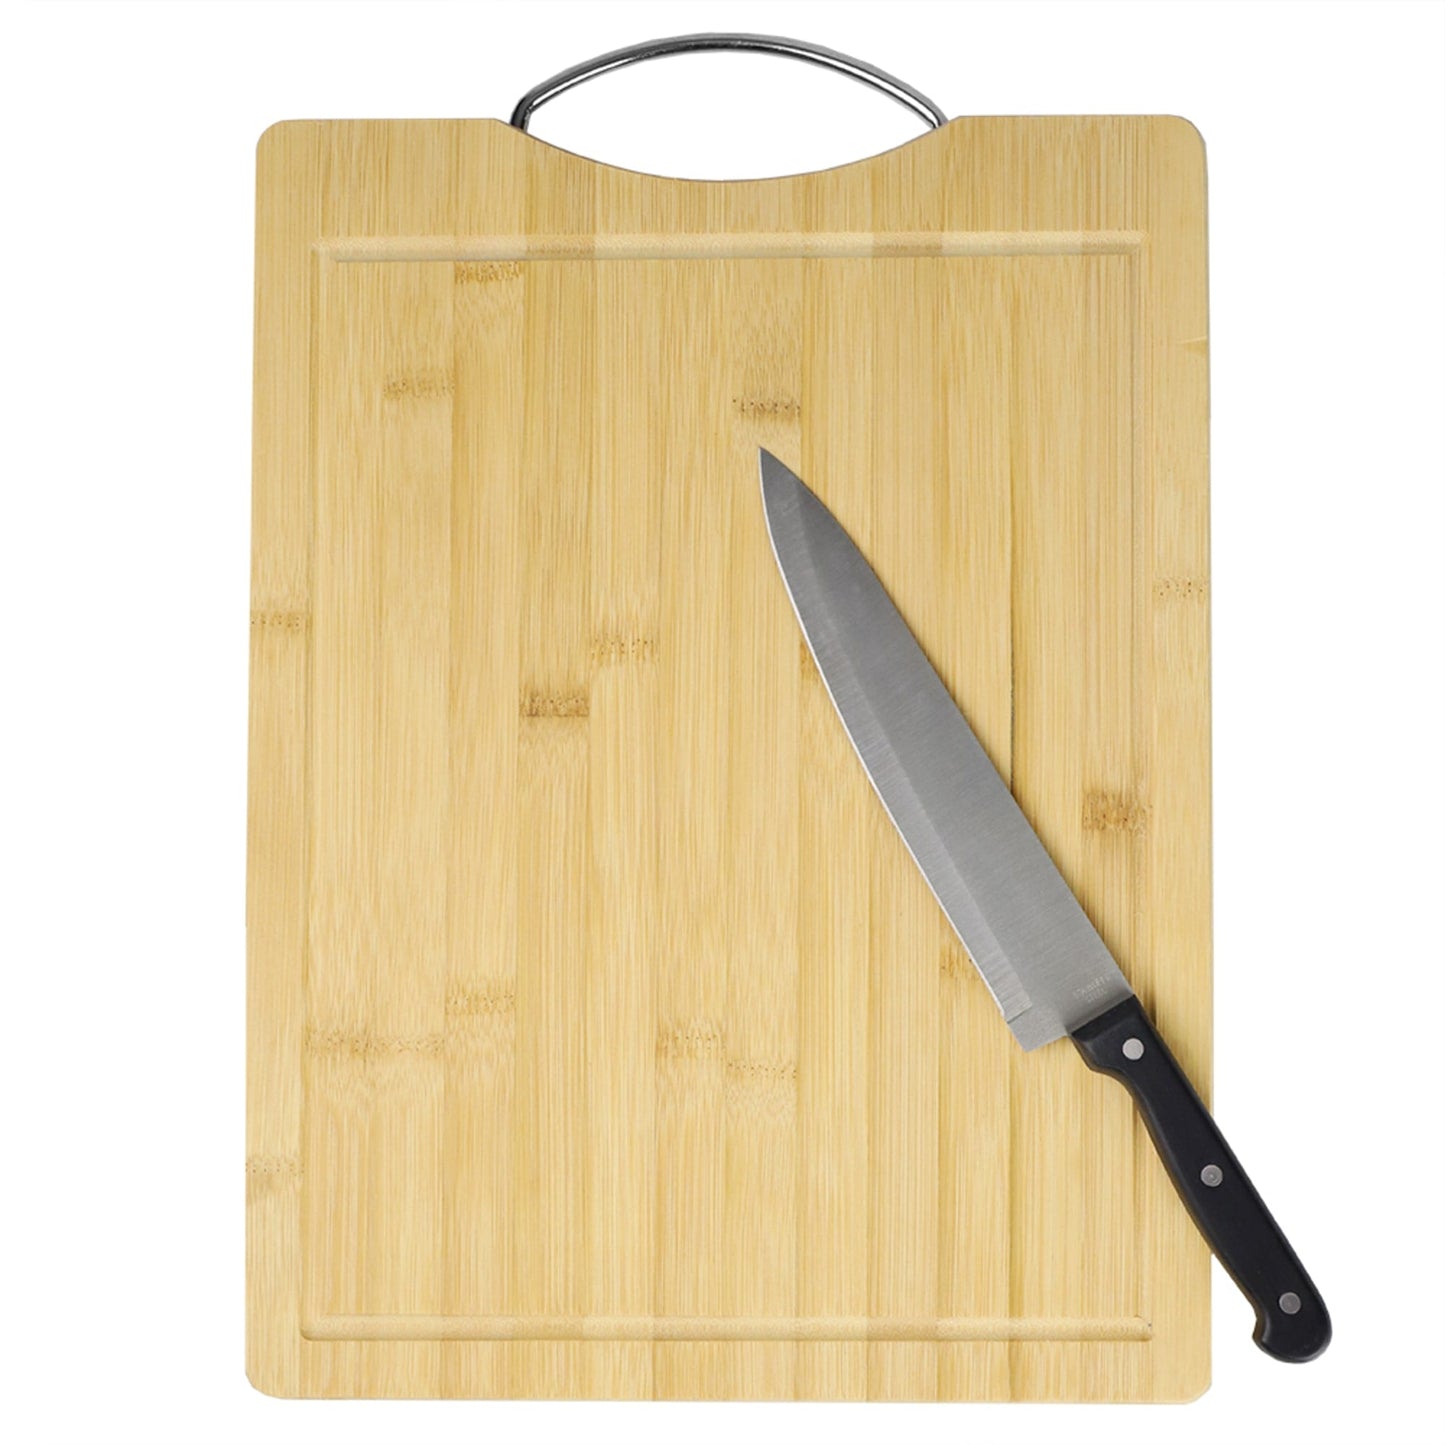 12" x 16" Bamboo Cutting Board with Juice Groove and Stainless Steel Handle